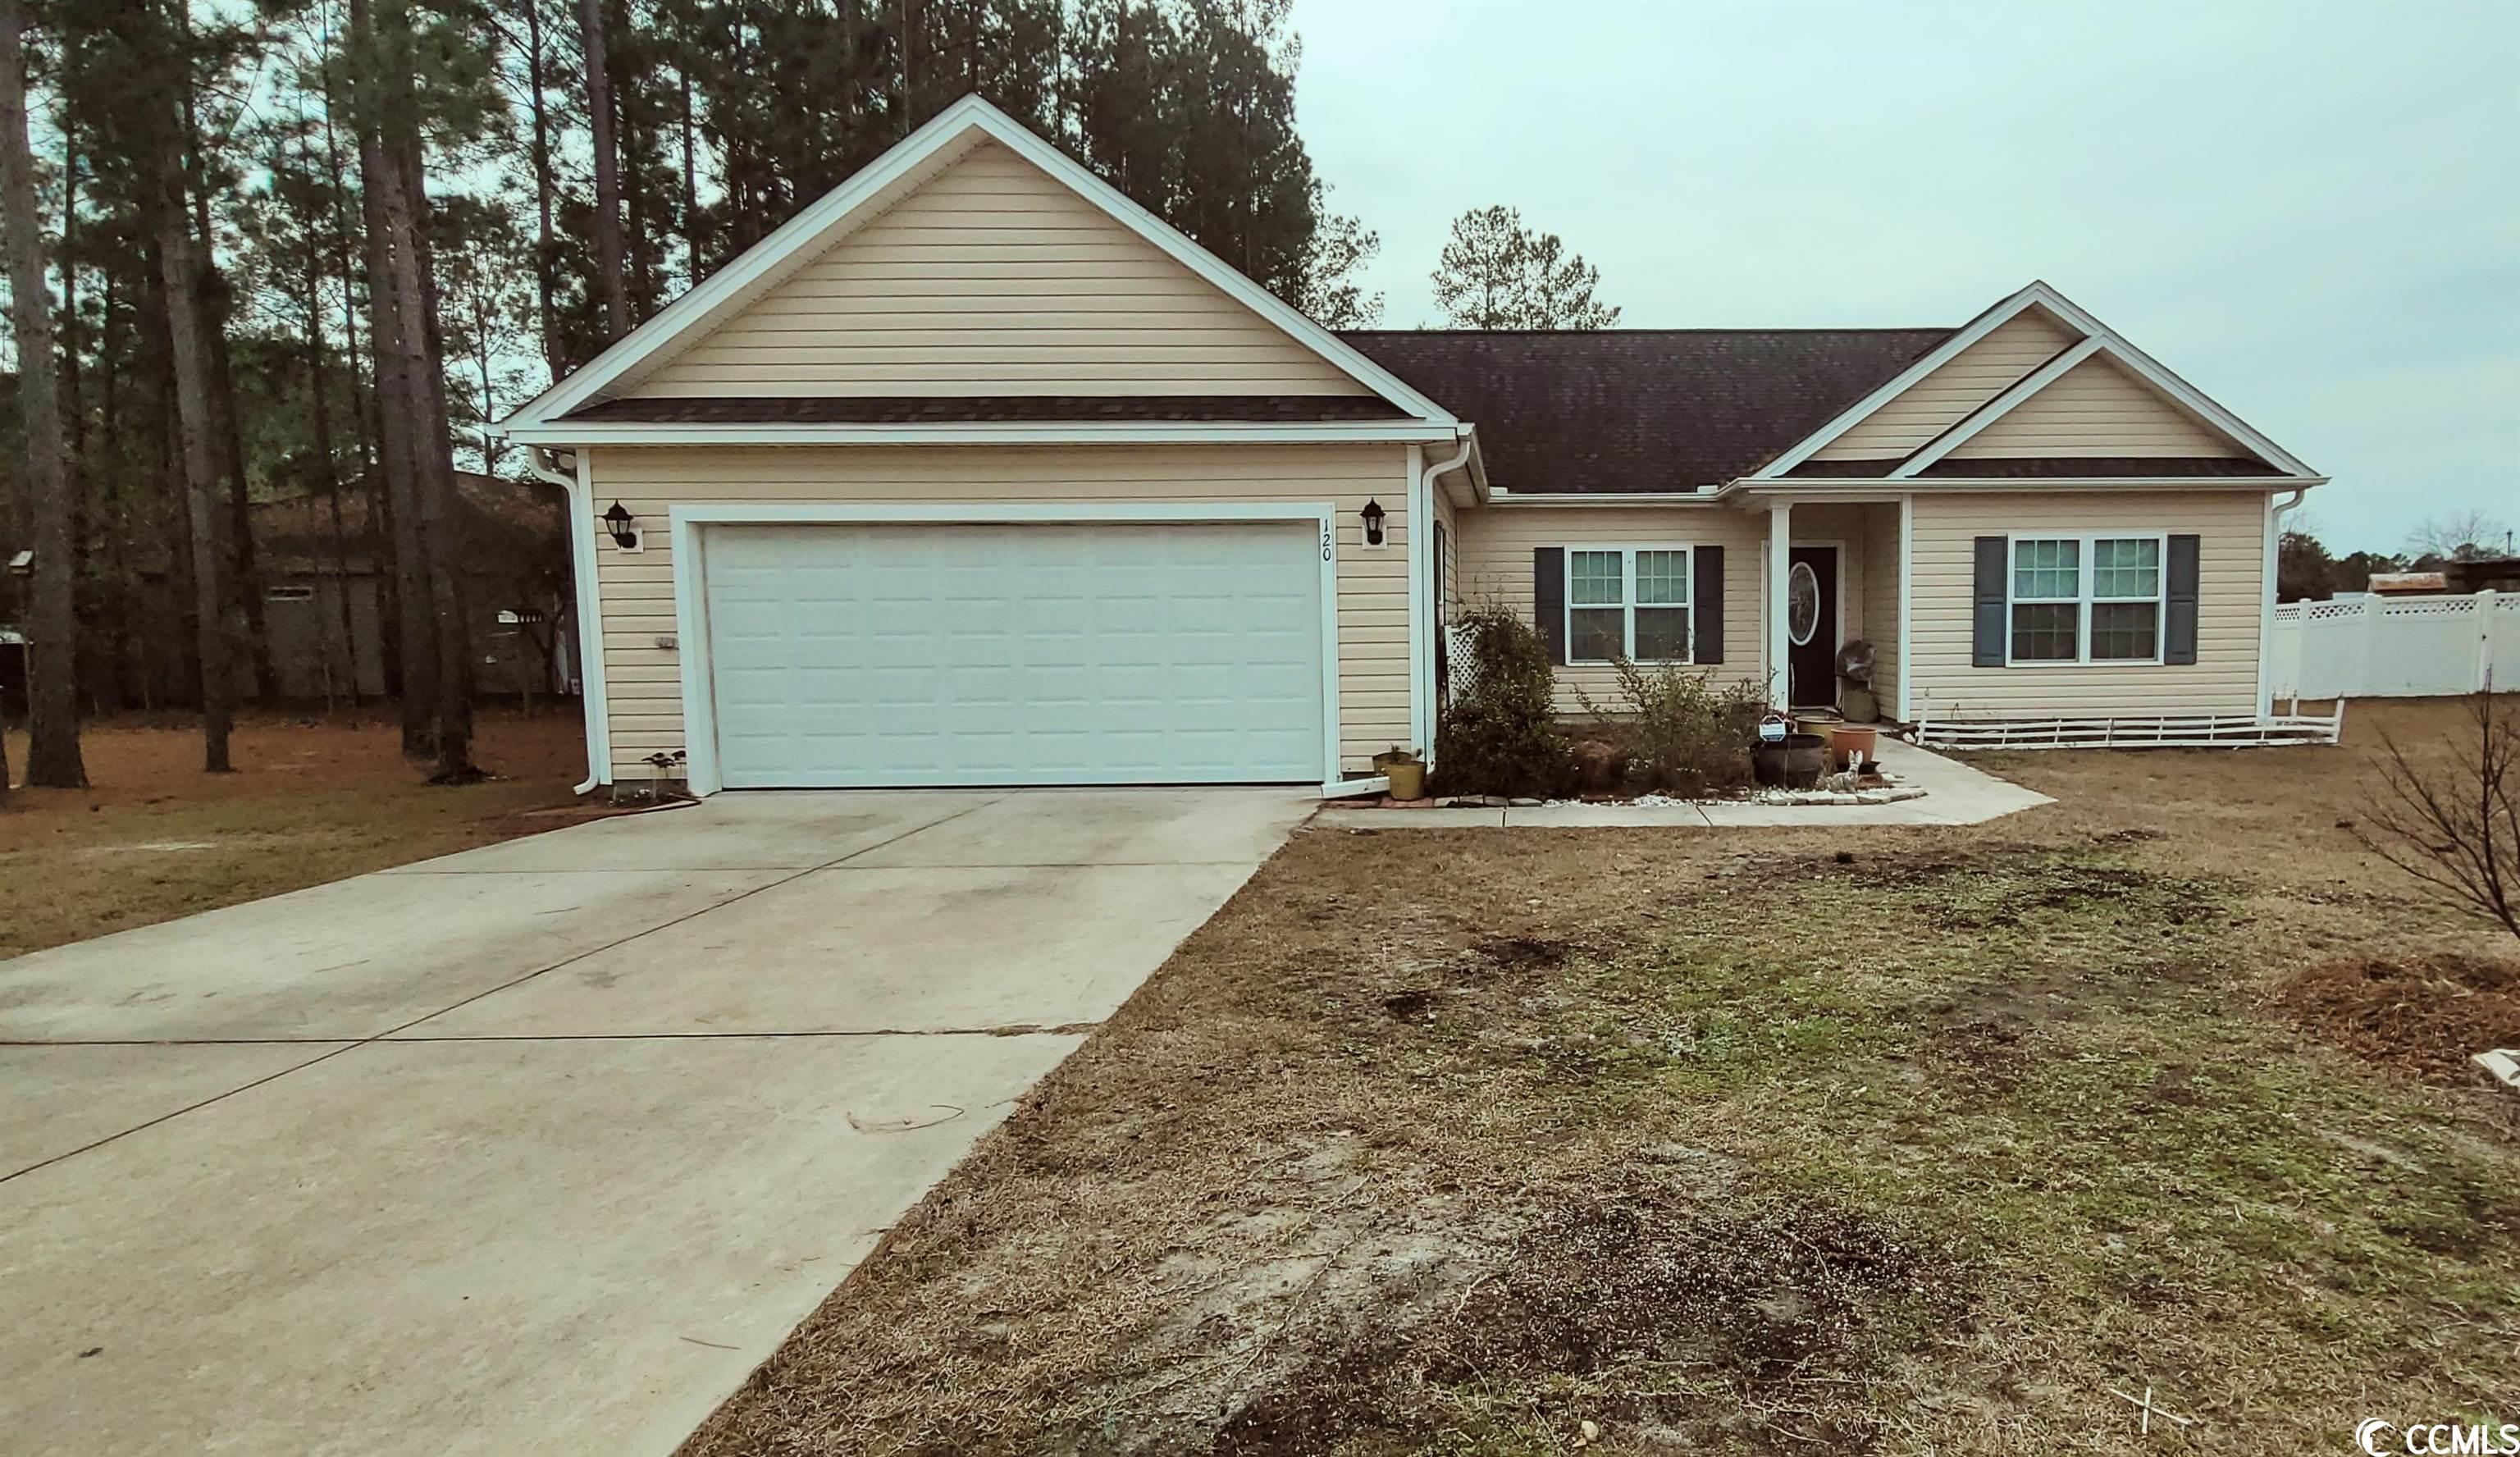 Photo one of 120 Family Farm Rd. Conway SC 29526 | MLS 2400669